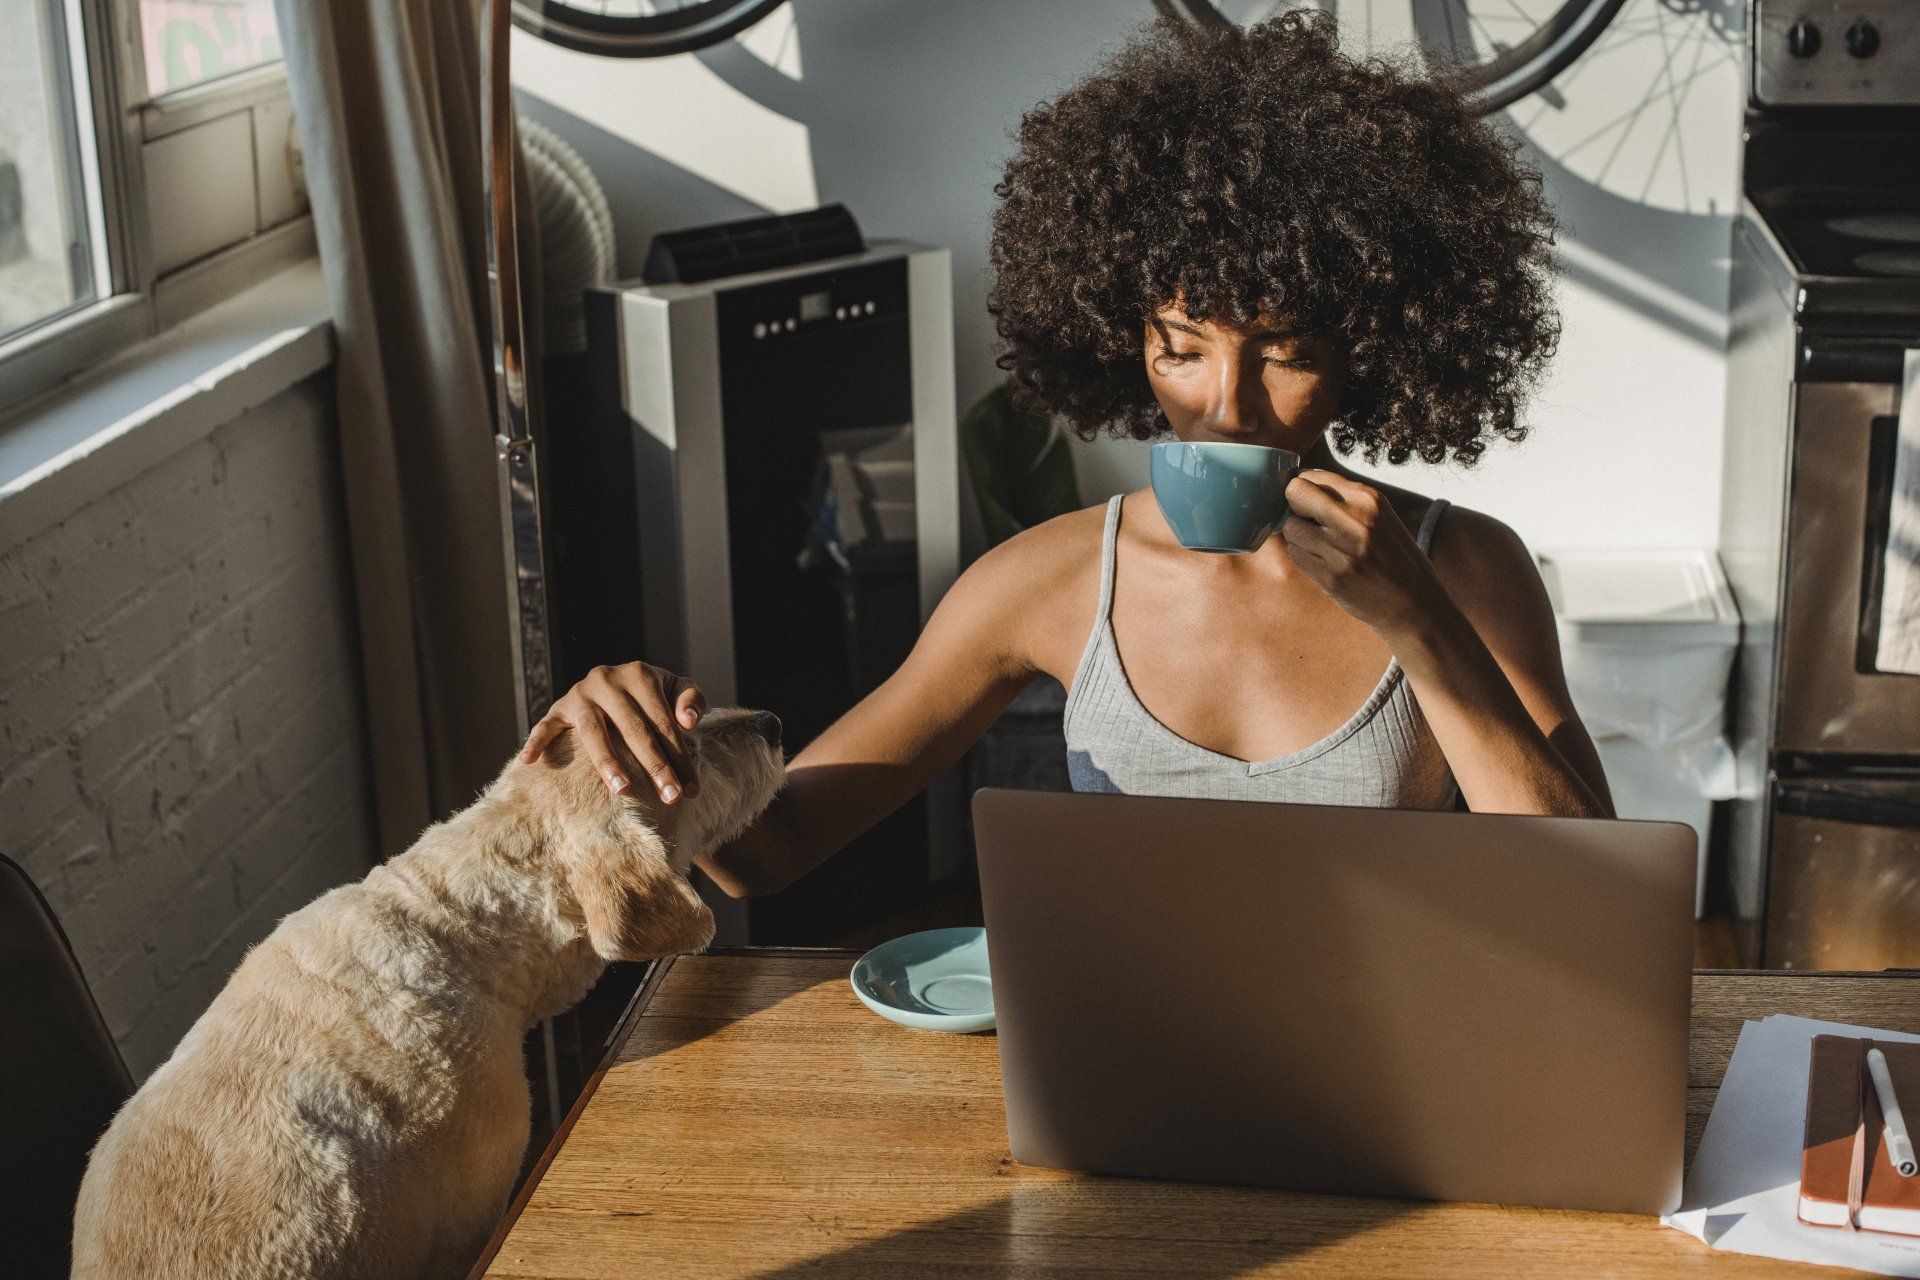 a woman drinking a cup of coffee while a dog looks on